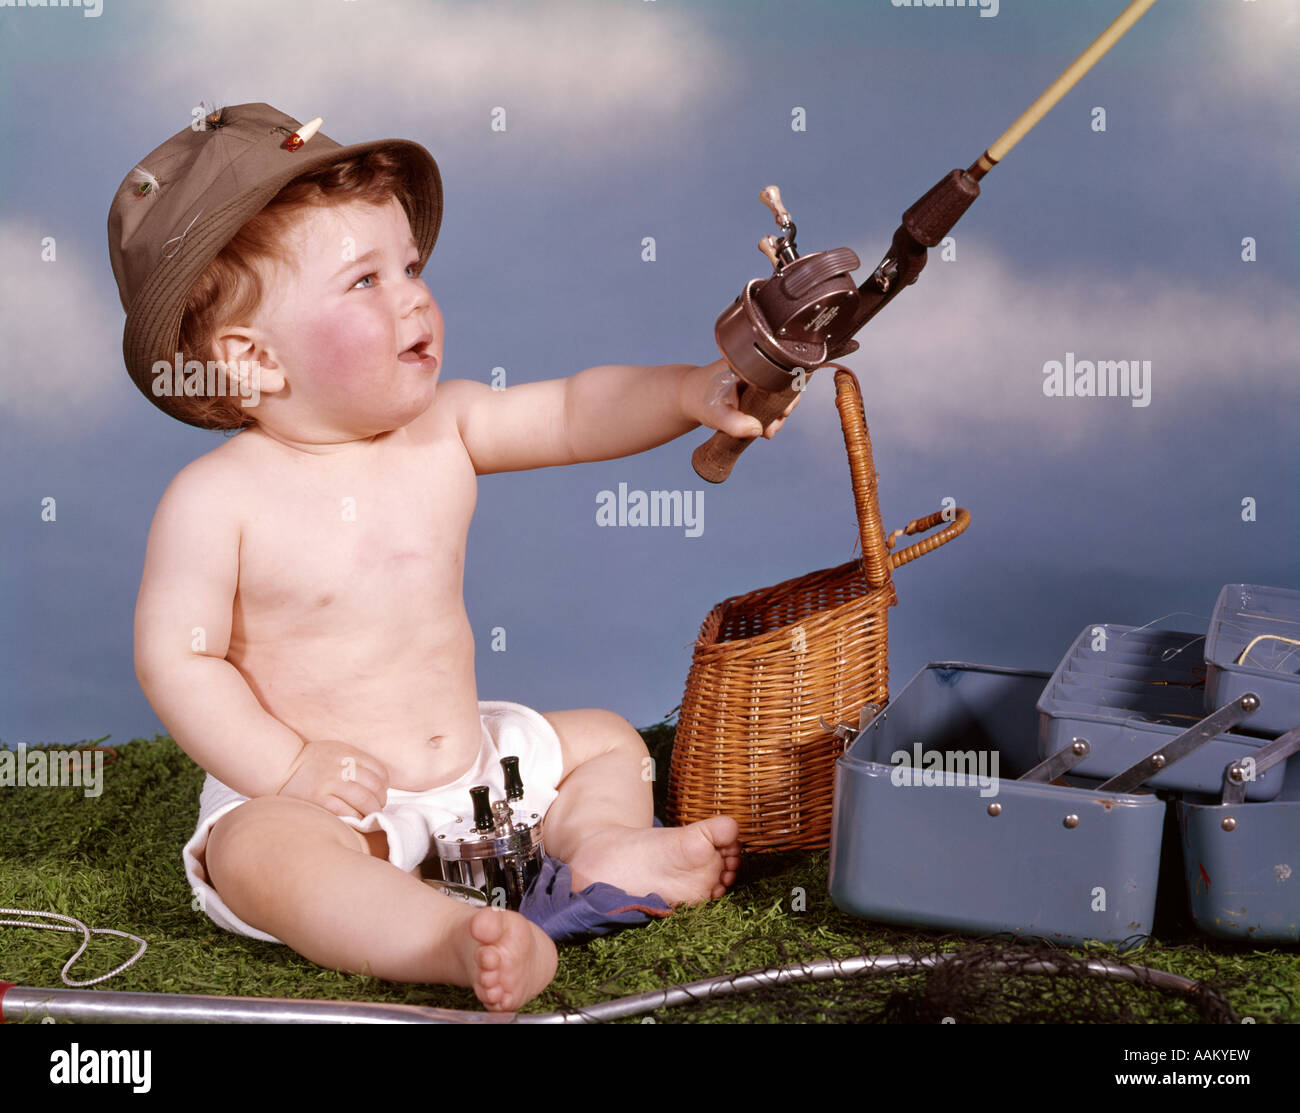 BABY WITH FISHING HAT AND GEAR HOLDING FISHING ROD STUDIO TACKLE BOX CREEL  BASKET Stock Photo - Alamy